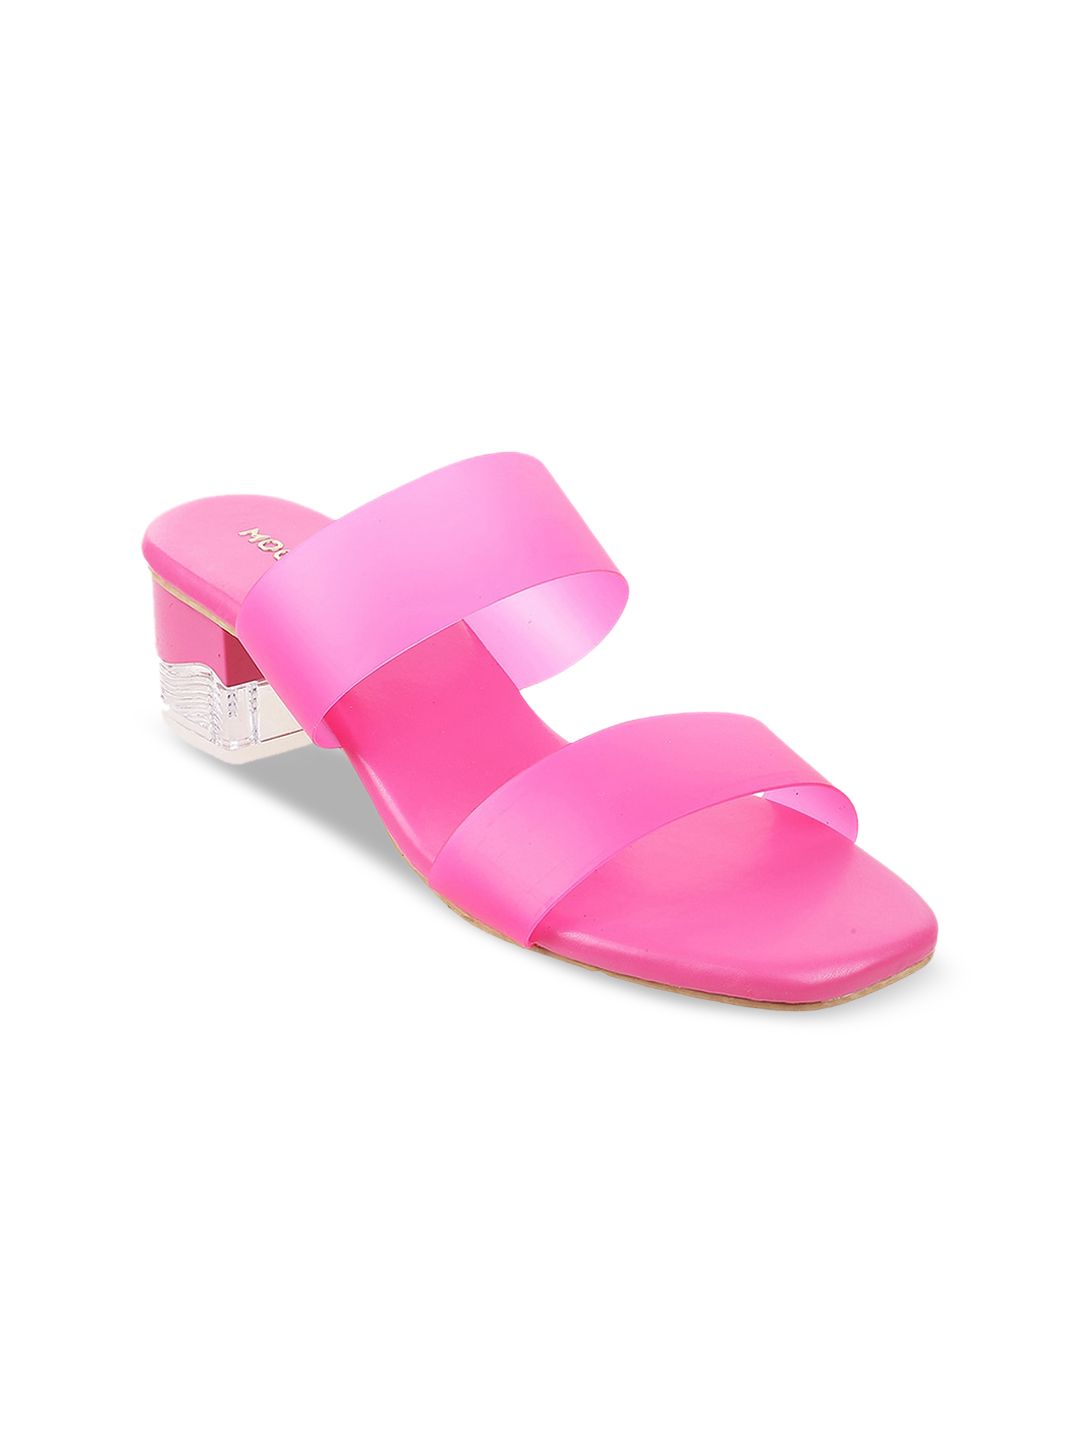 Mochi Pink Colourblocked Block Sandals Price in India